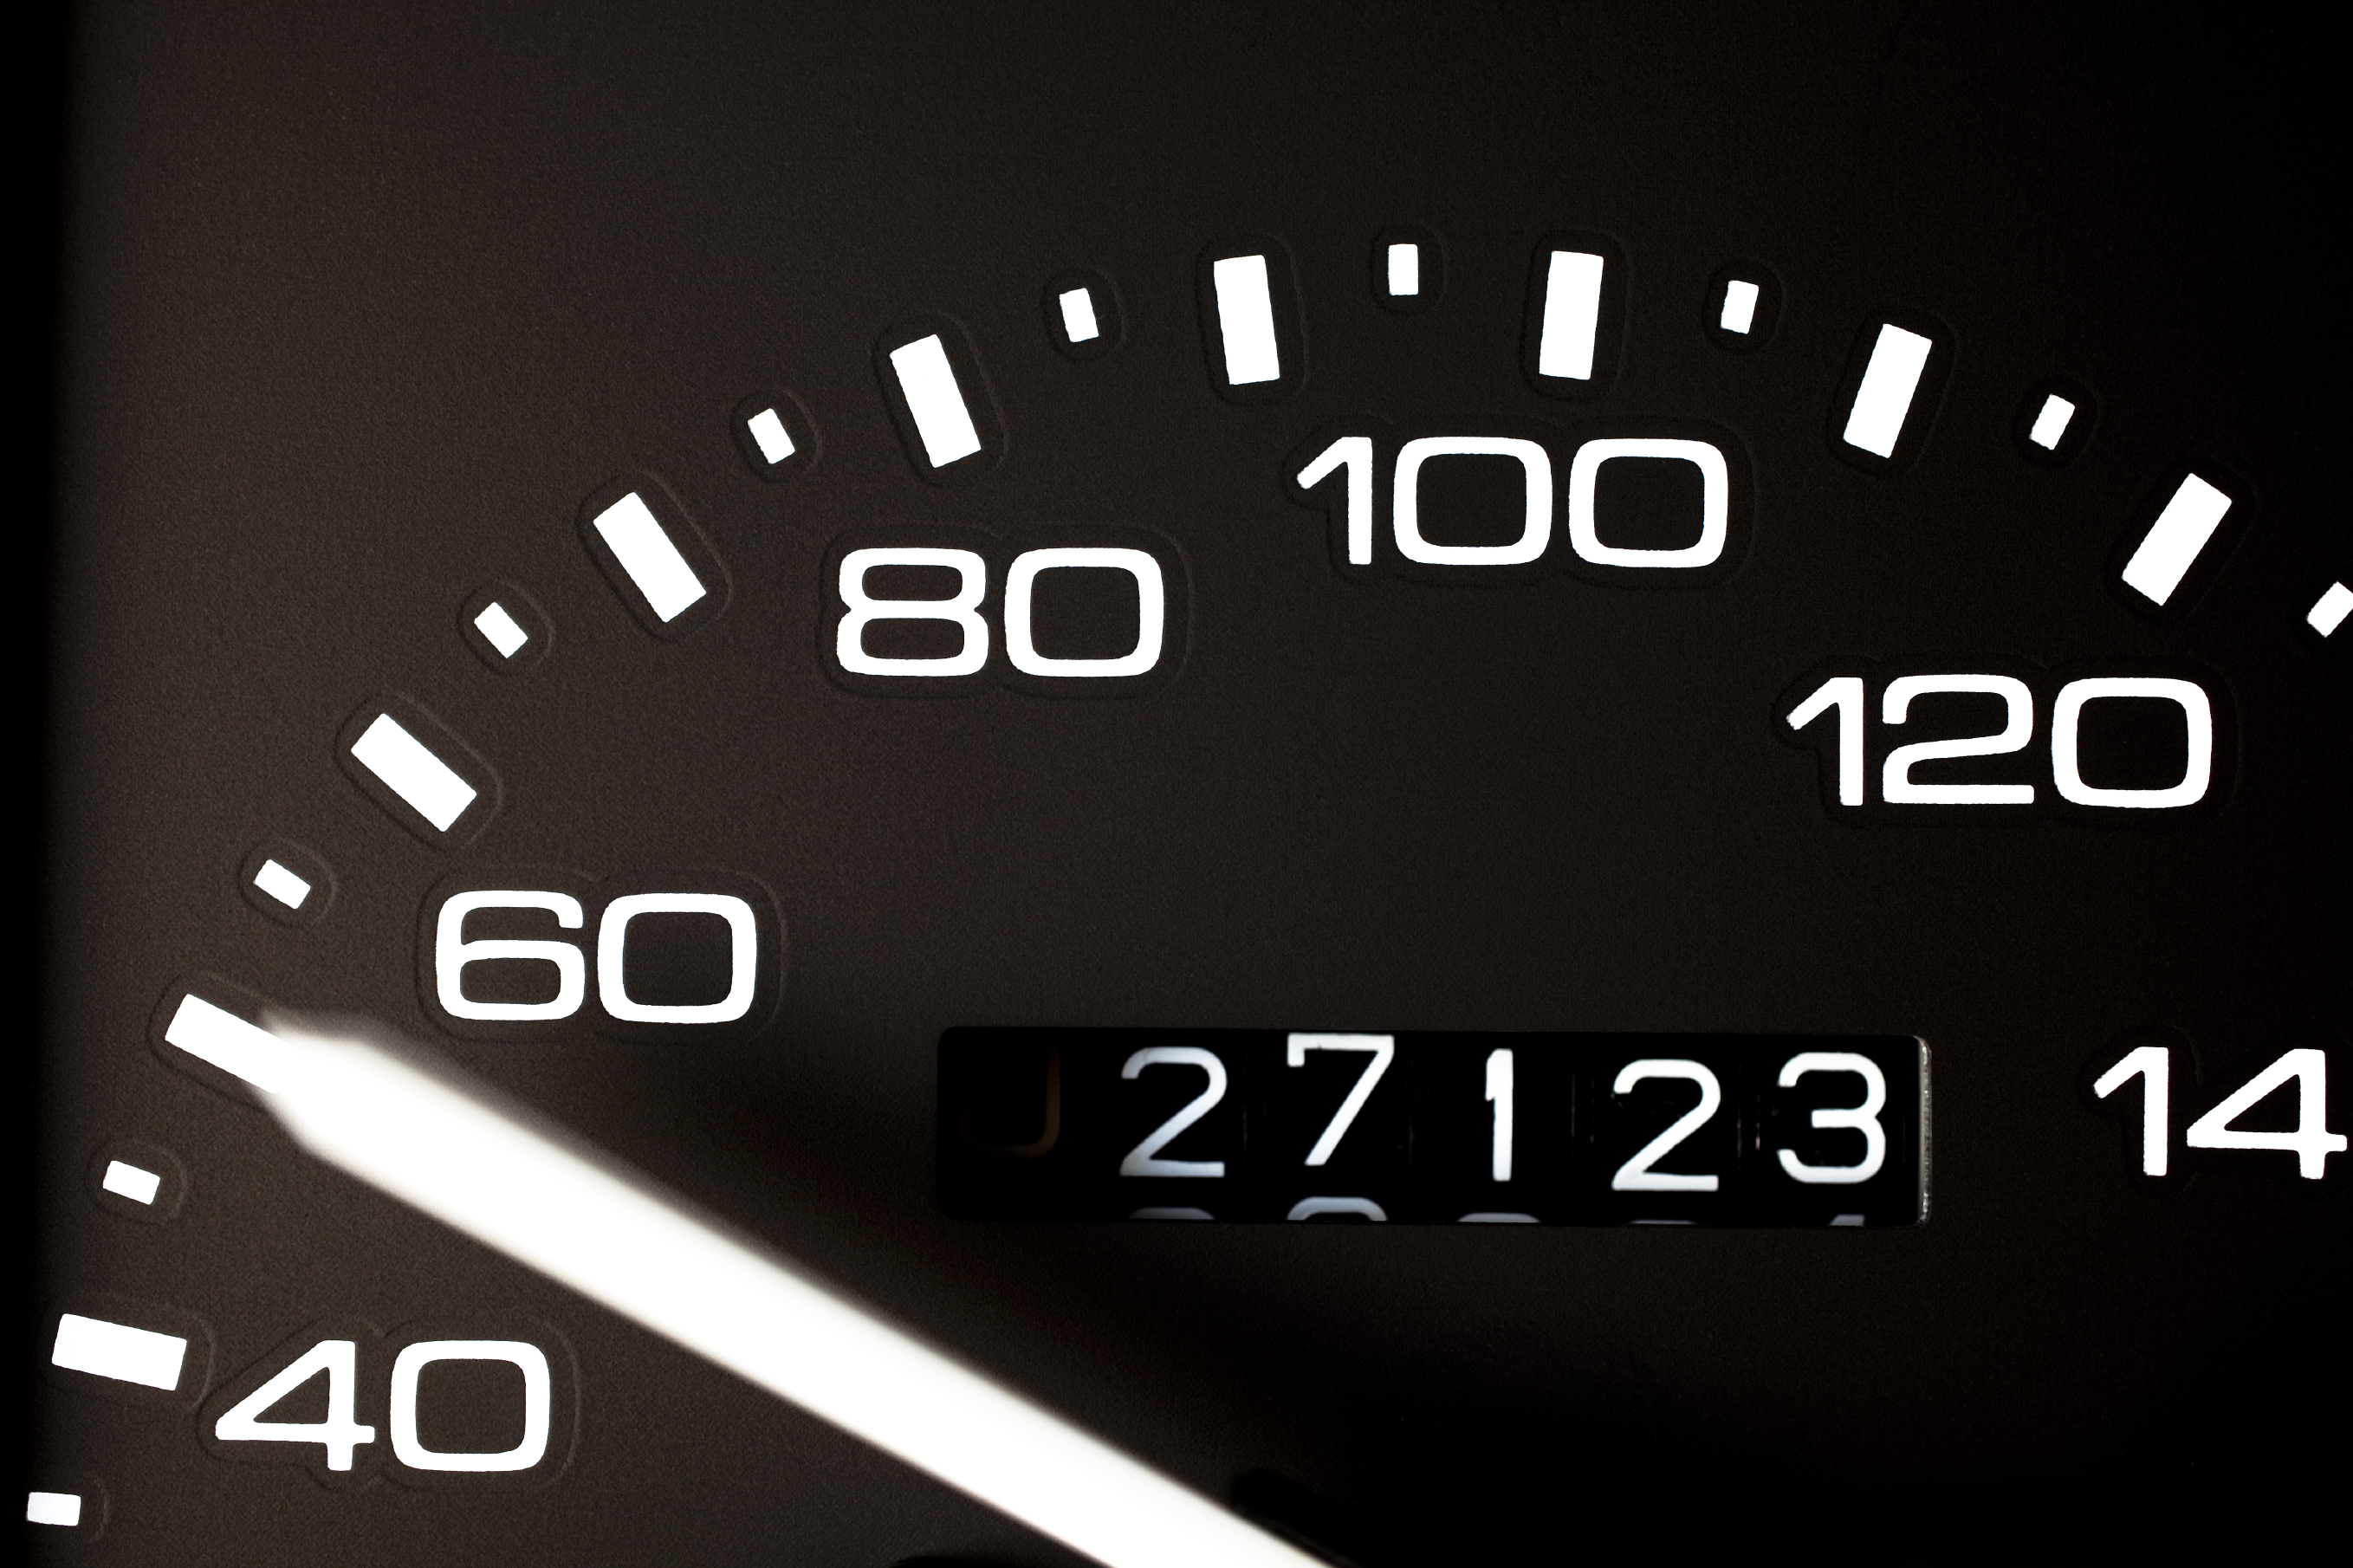 How do you find the IRS standard mileage rates?